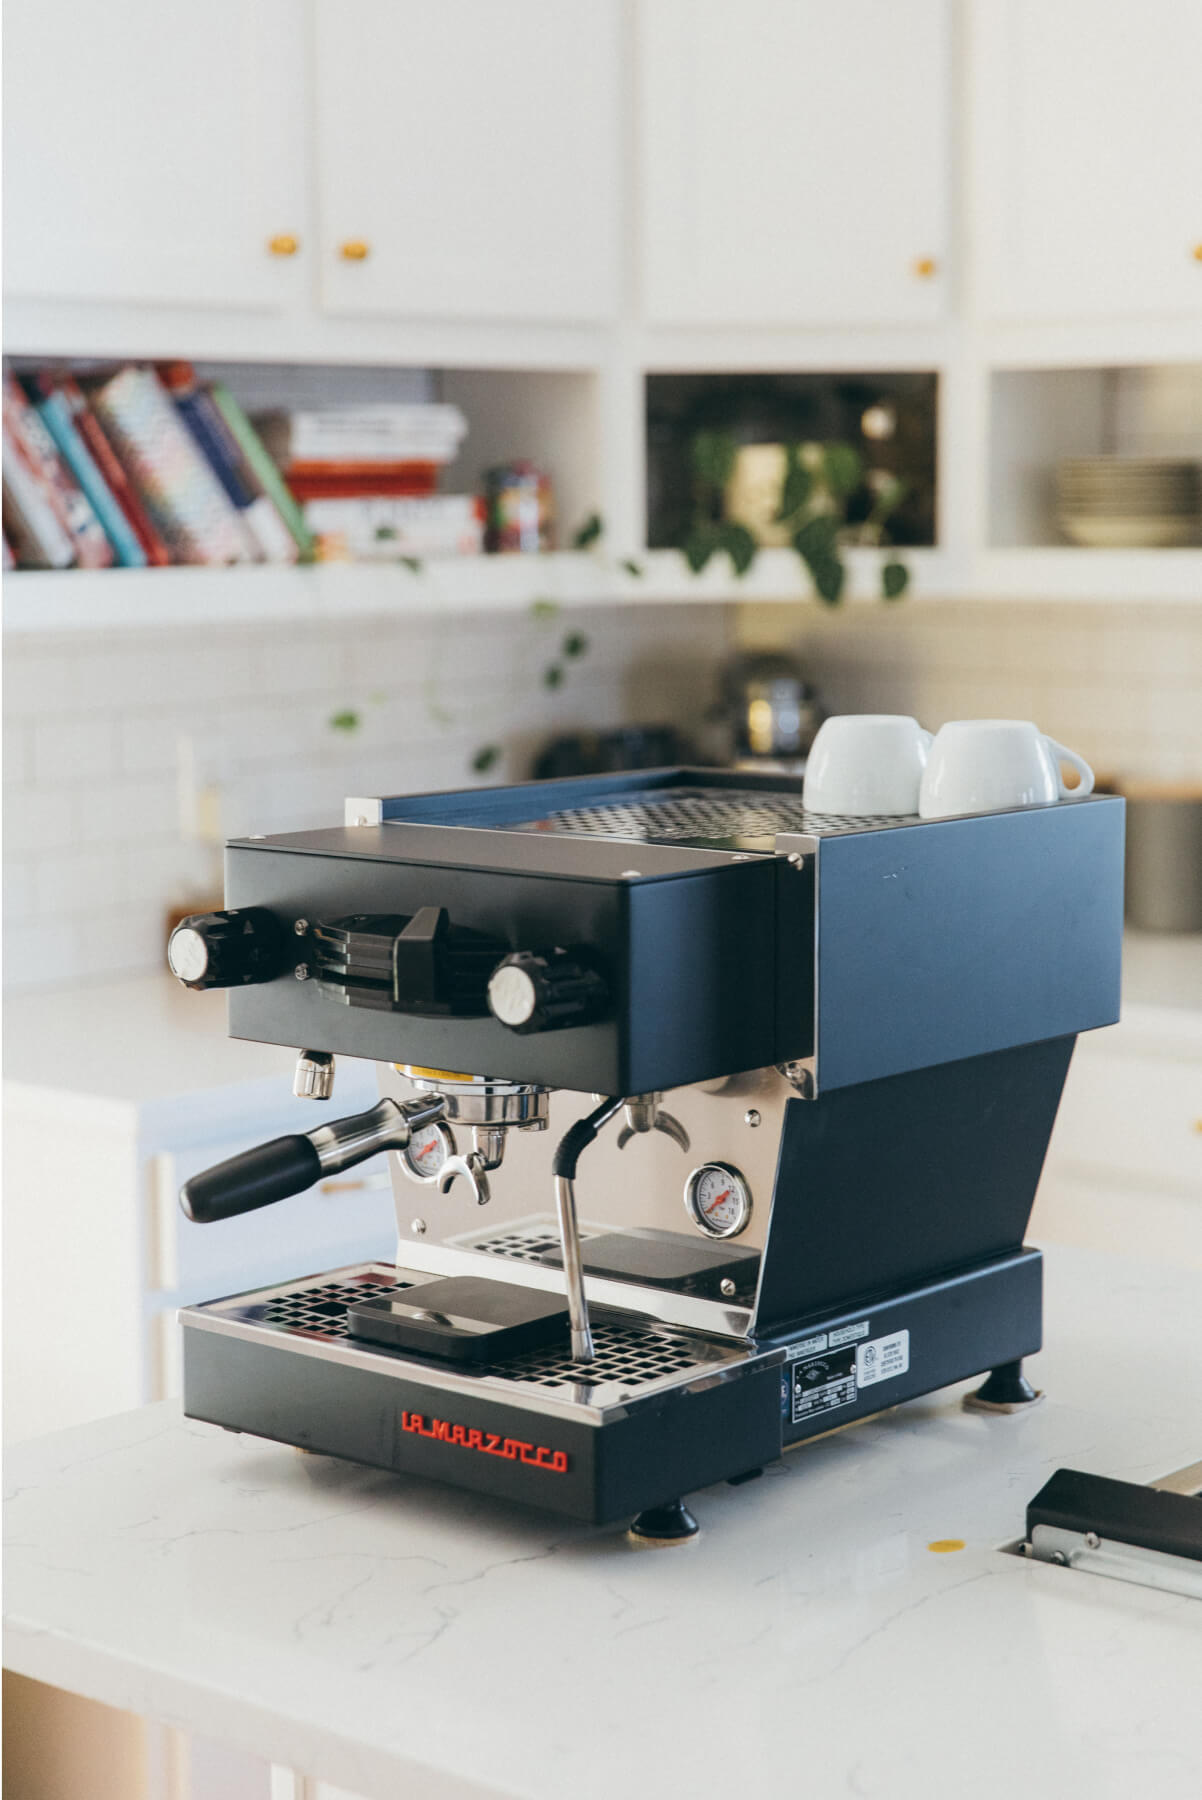 https://lamarzocco.com/brew-by-weight-check/_common/images/find-serial-number.jpg